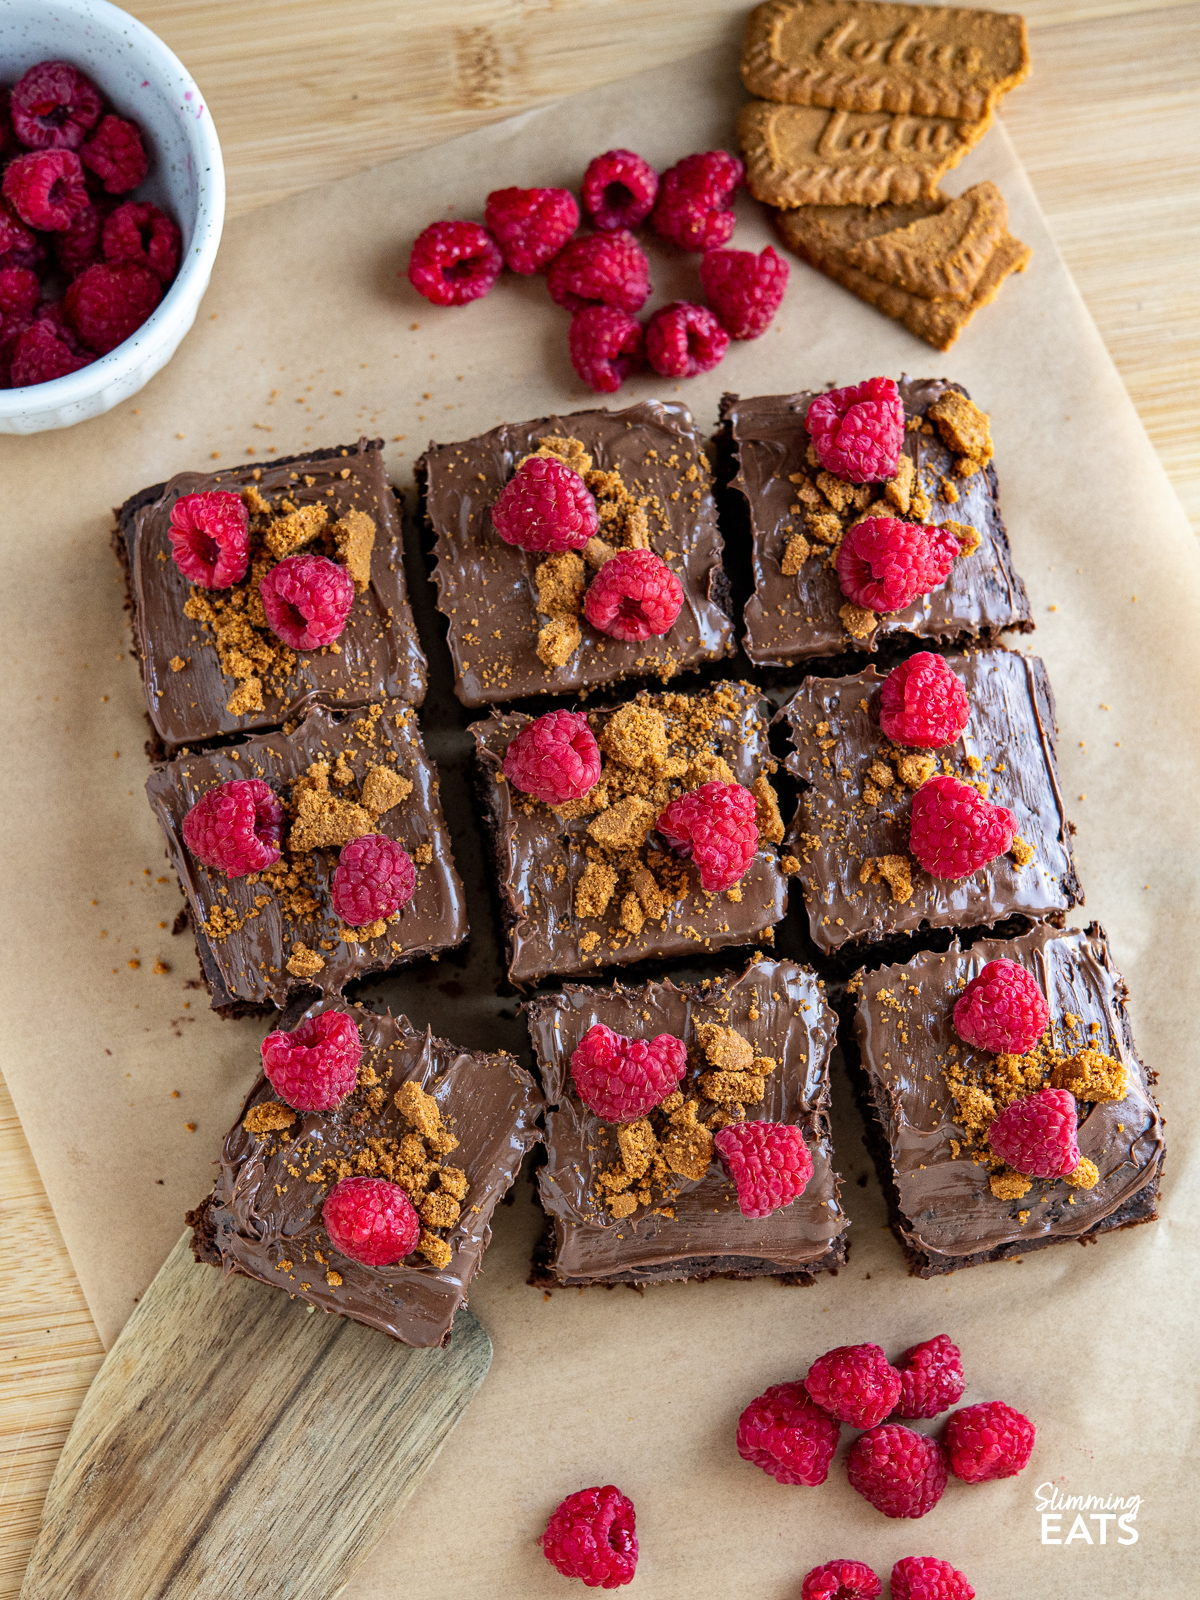 sliced Raspberry Nutella Chocolate Cake on a wooden board with scattered raspberries and lotus cookies